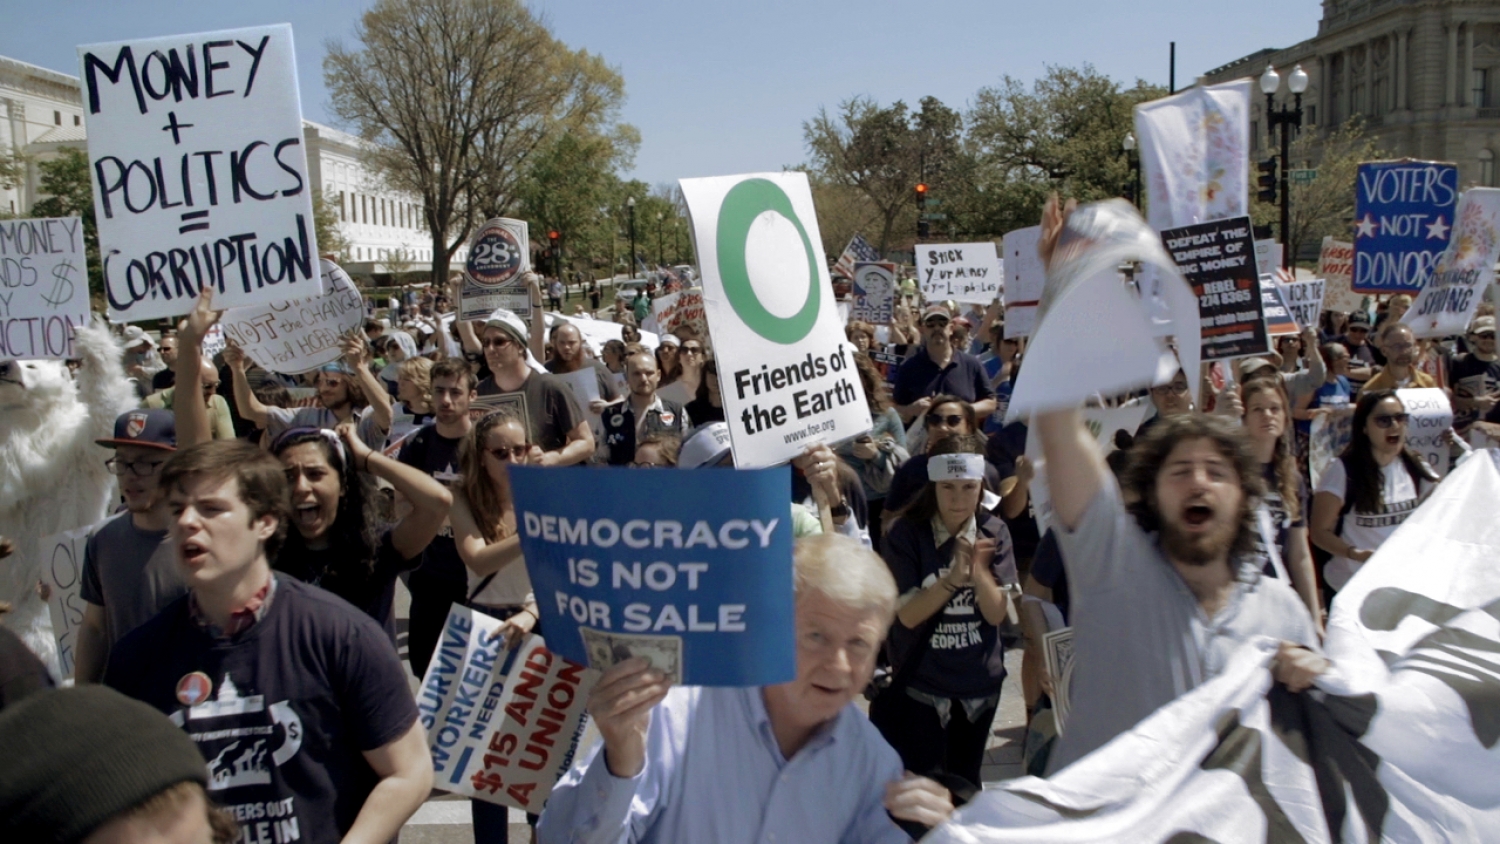 Protesters in Washington, DC. From Kimberly Reed's "Dark Money," which opens in theaters July 13 through PBS Distribution. Courtesy of POV